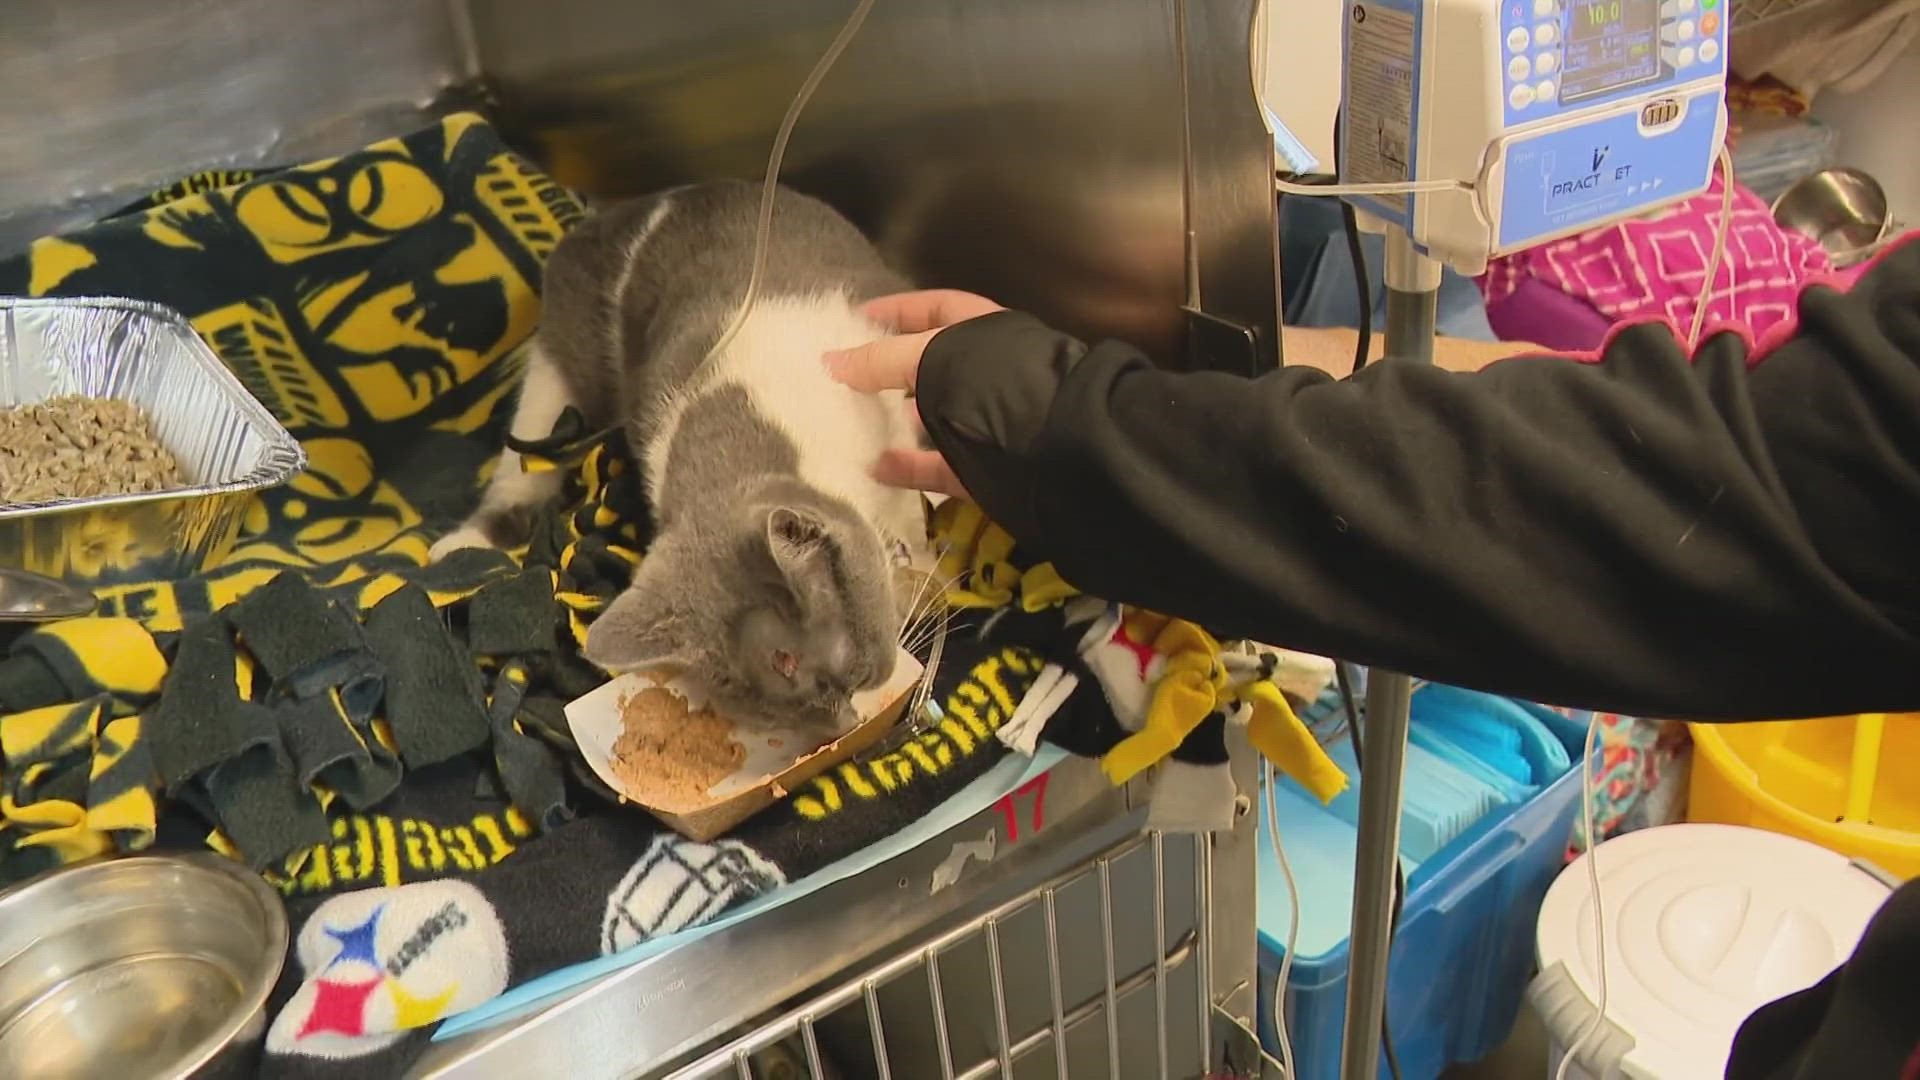 "Kitty" is recovering at Indianapolis Animal Care Services.